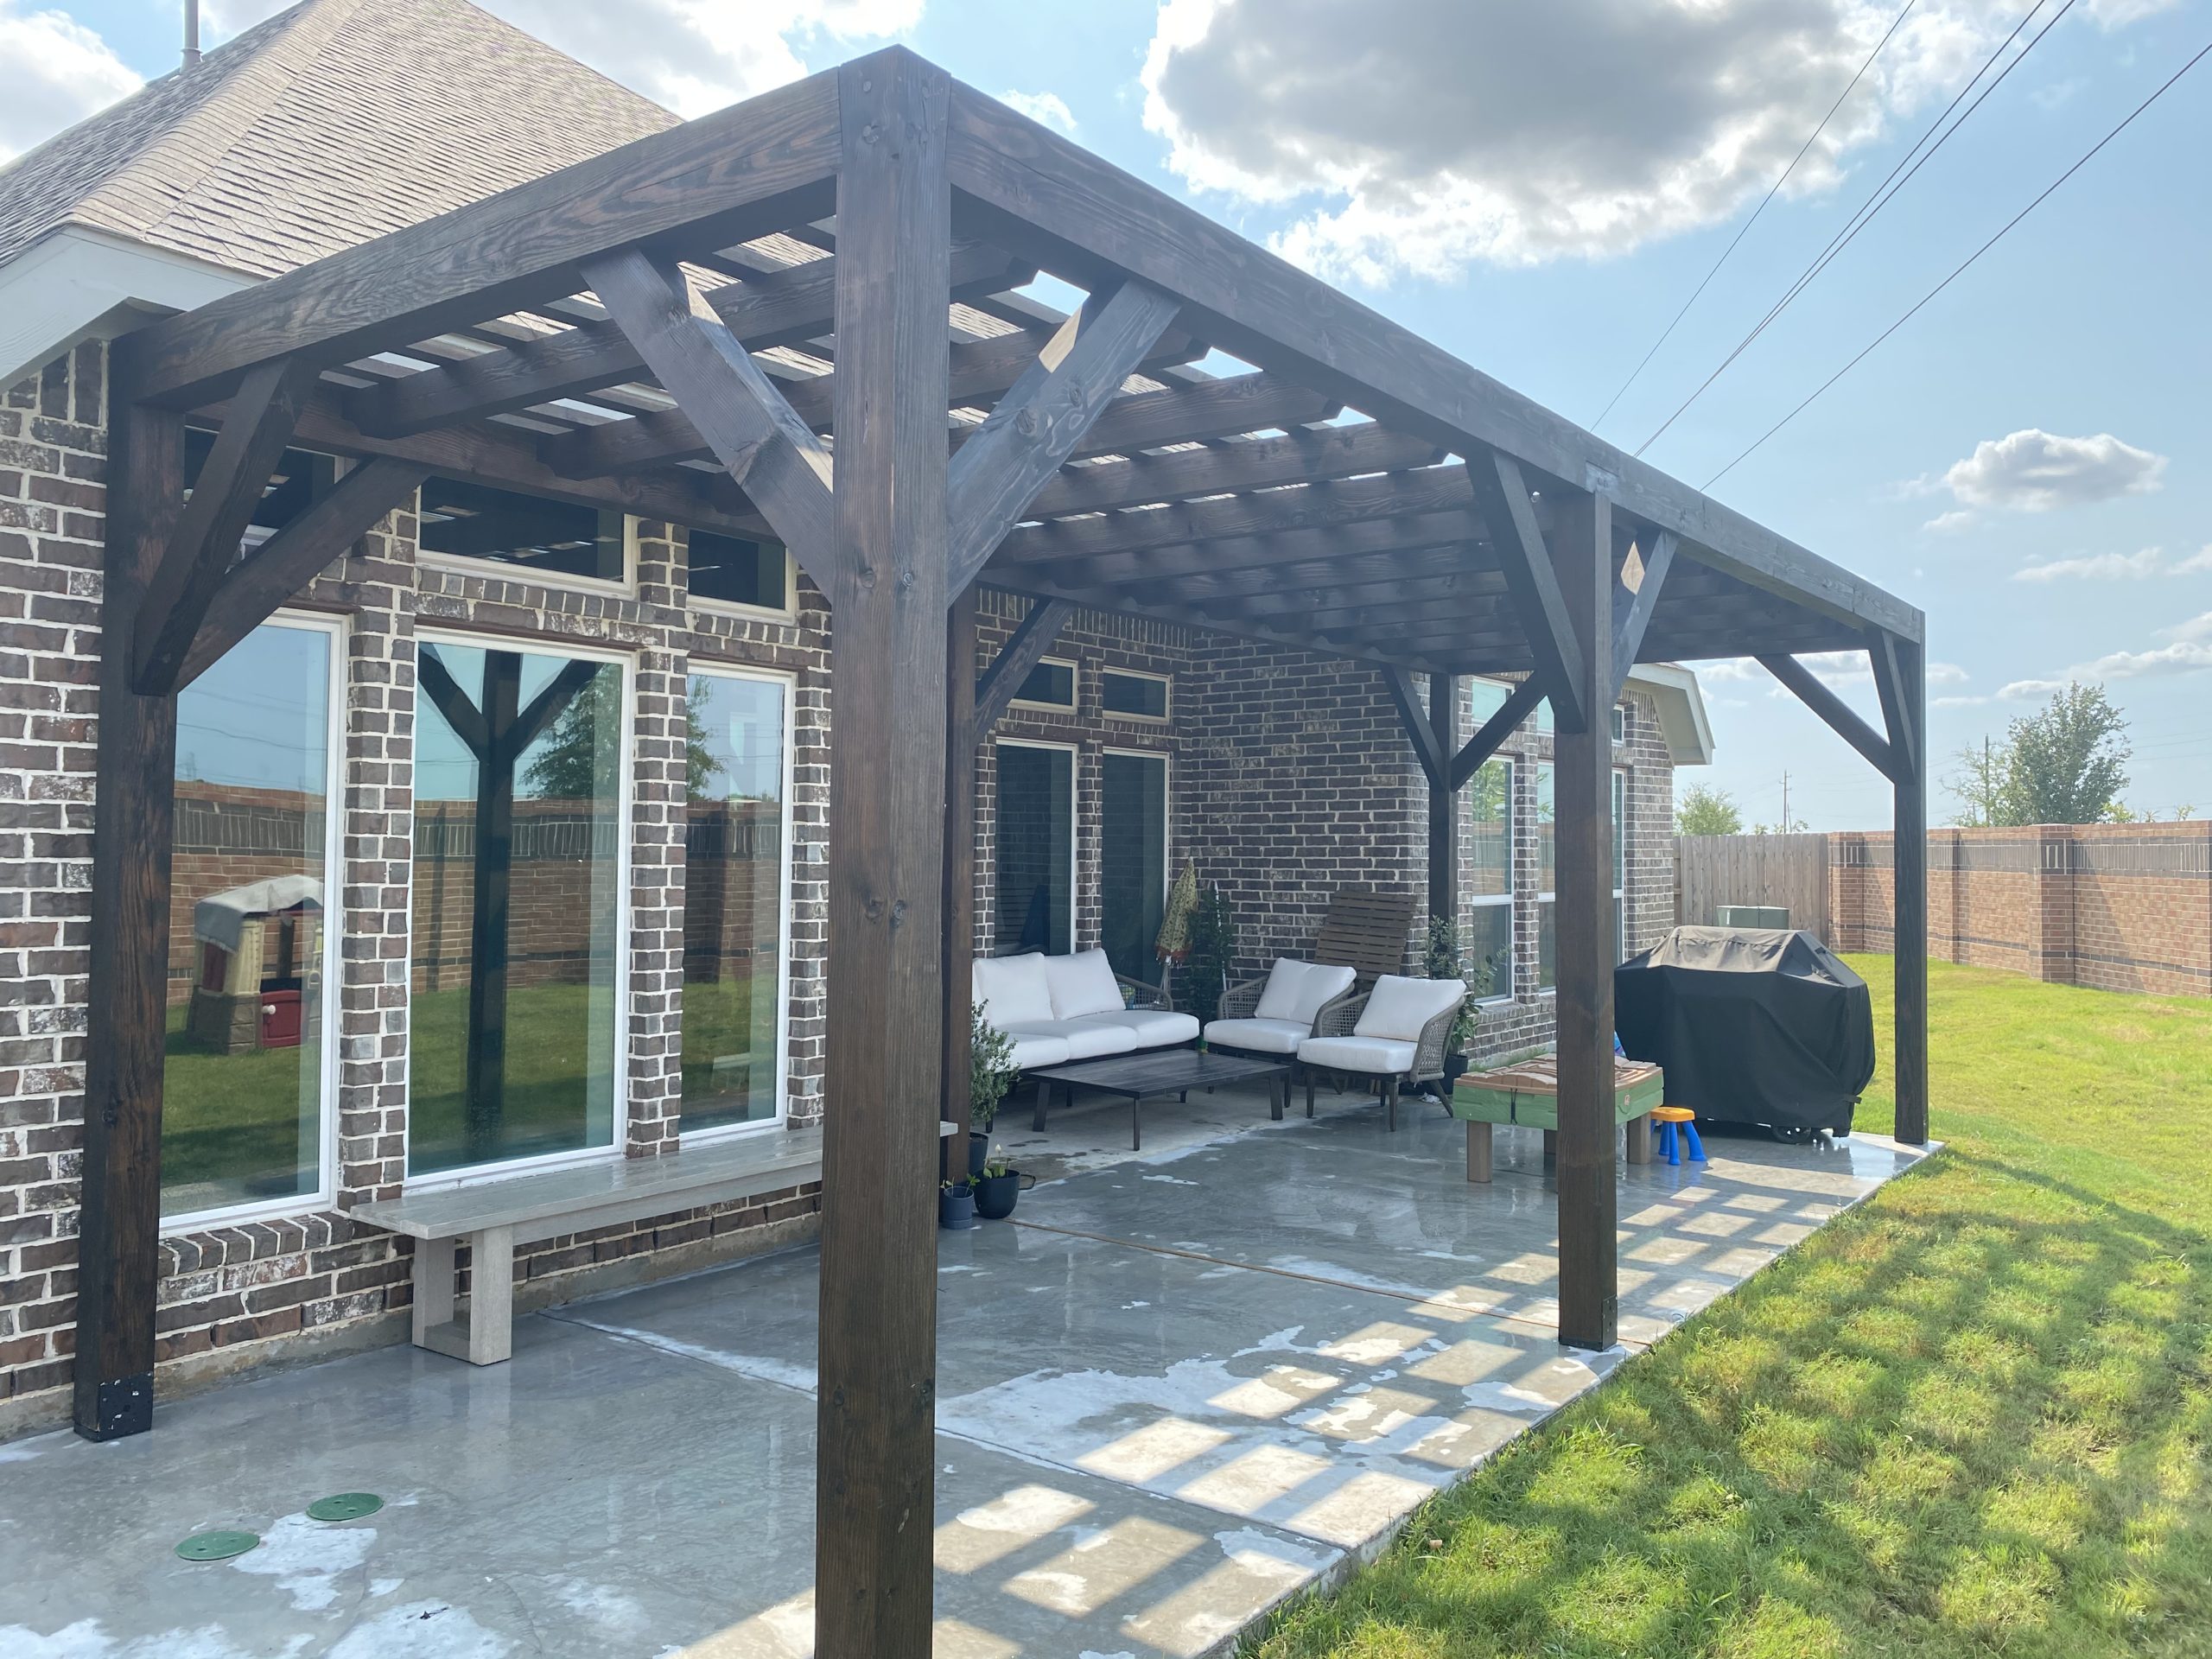 26x9, Modern, Pergola, 6 Posts, Patio Extension, Residential, Oversize, Barbeque or Grill, Patio Furniture, Concrete or Cement Pad, Houston, Katy, Douglas Fir, Cedar, Outdoor Living